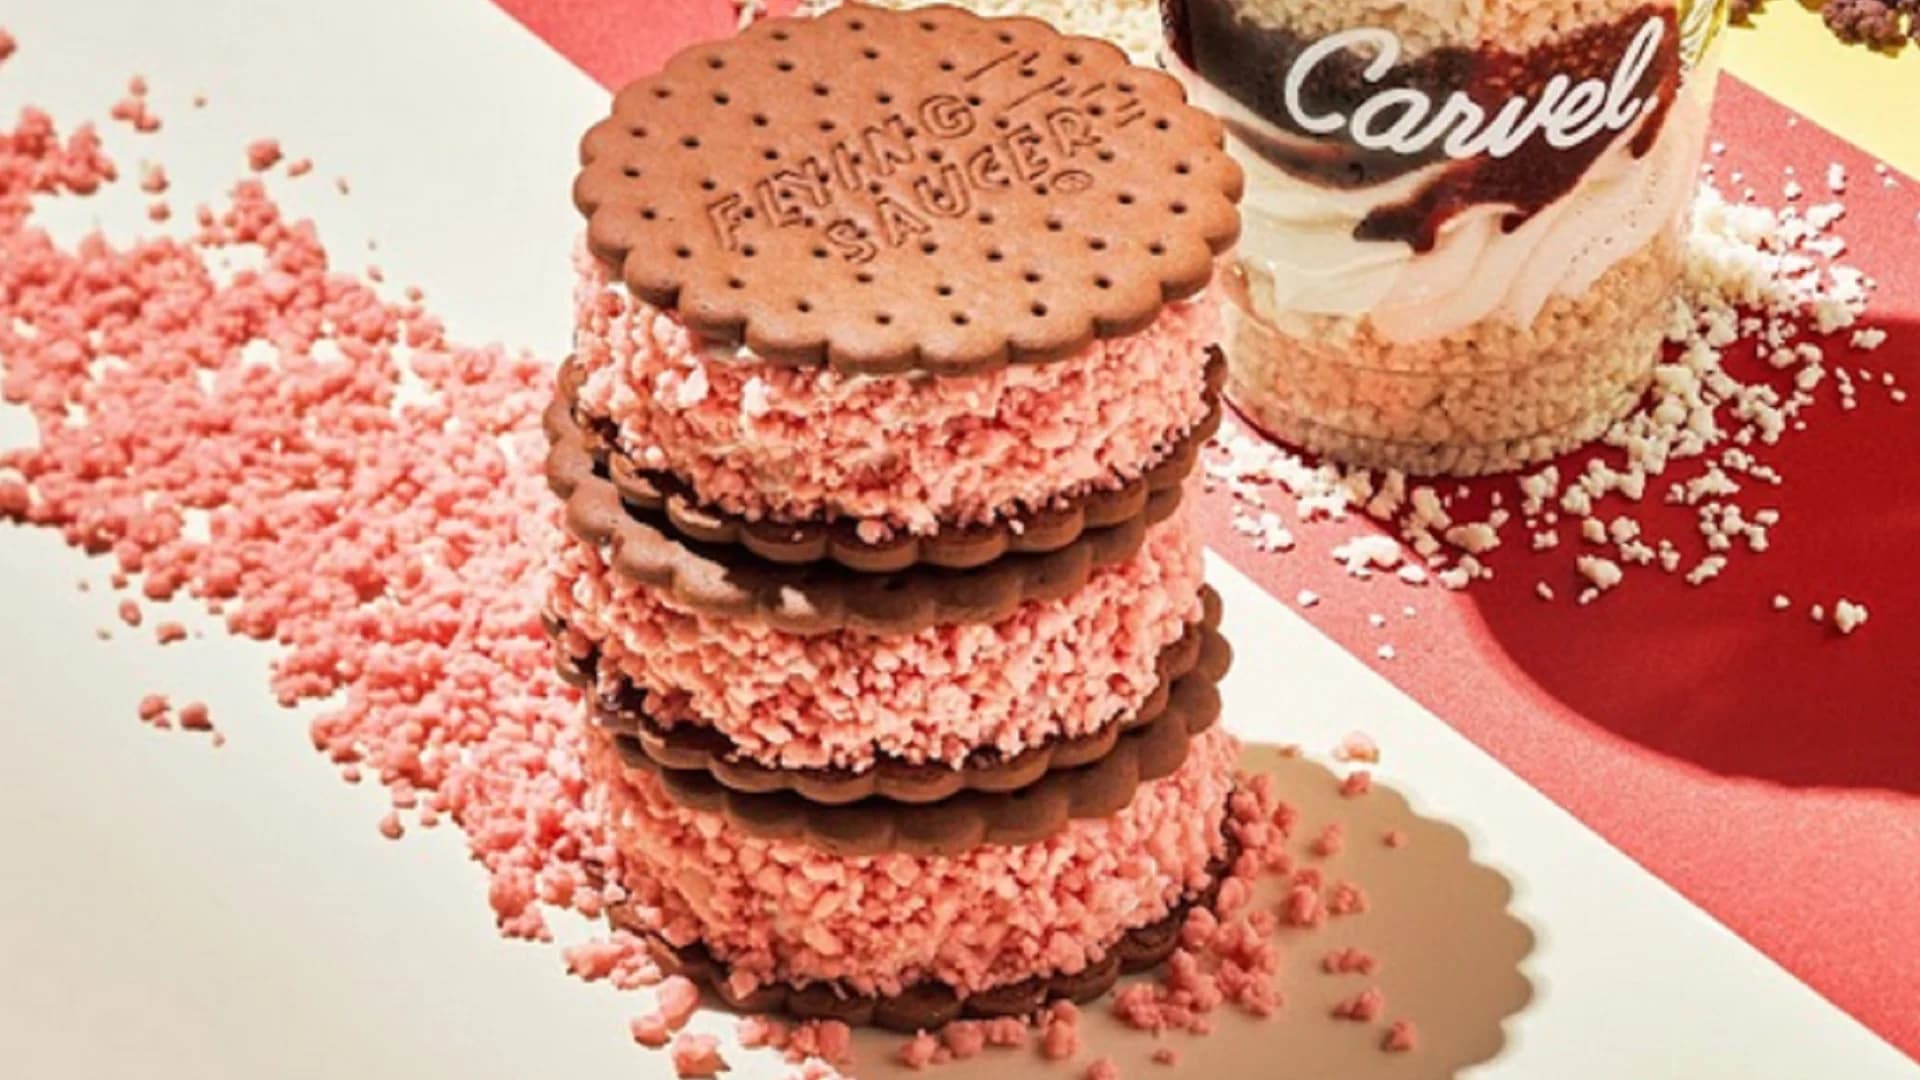 Strawberry joins the classic Carvel 'Crunchie' catalog